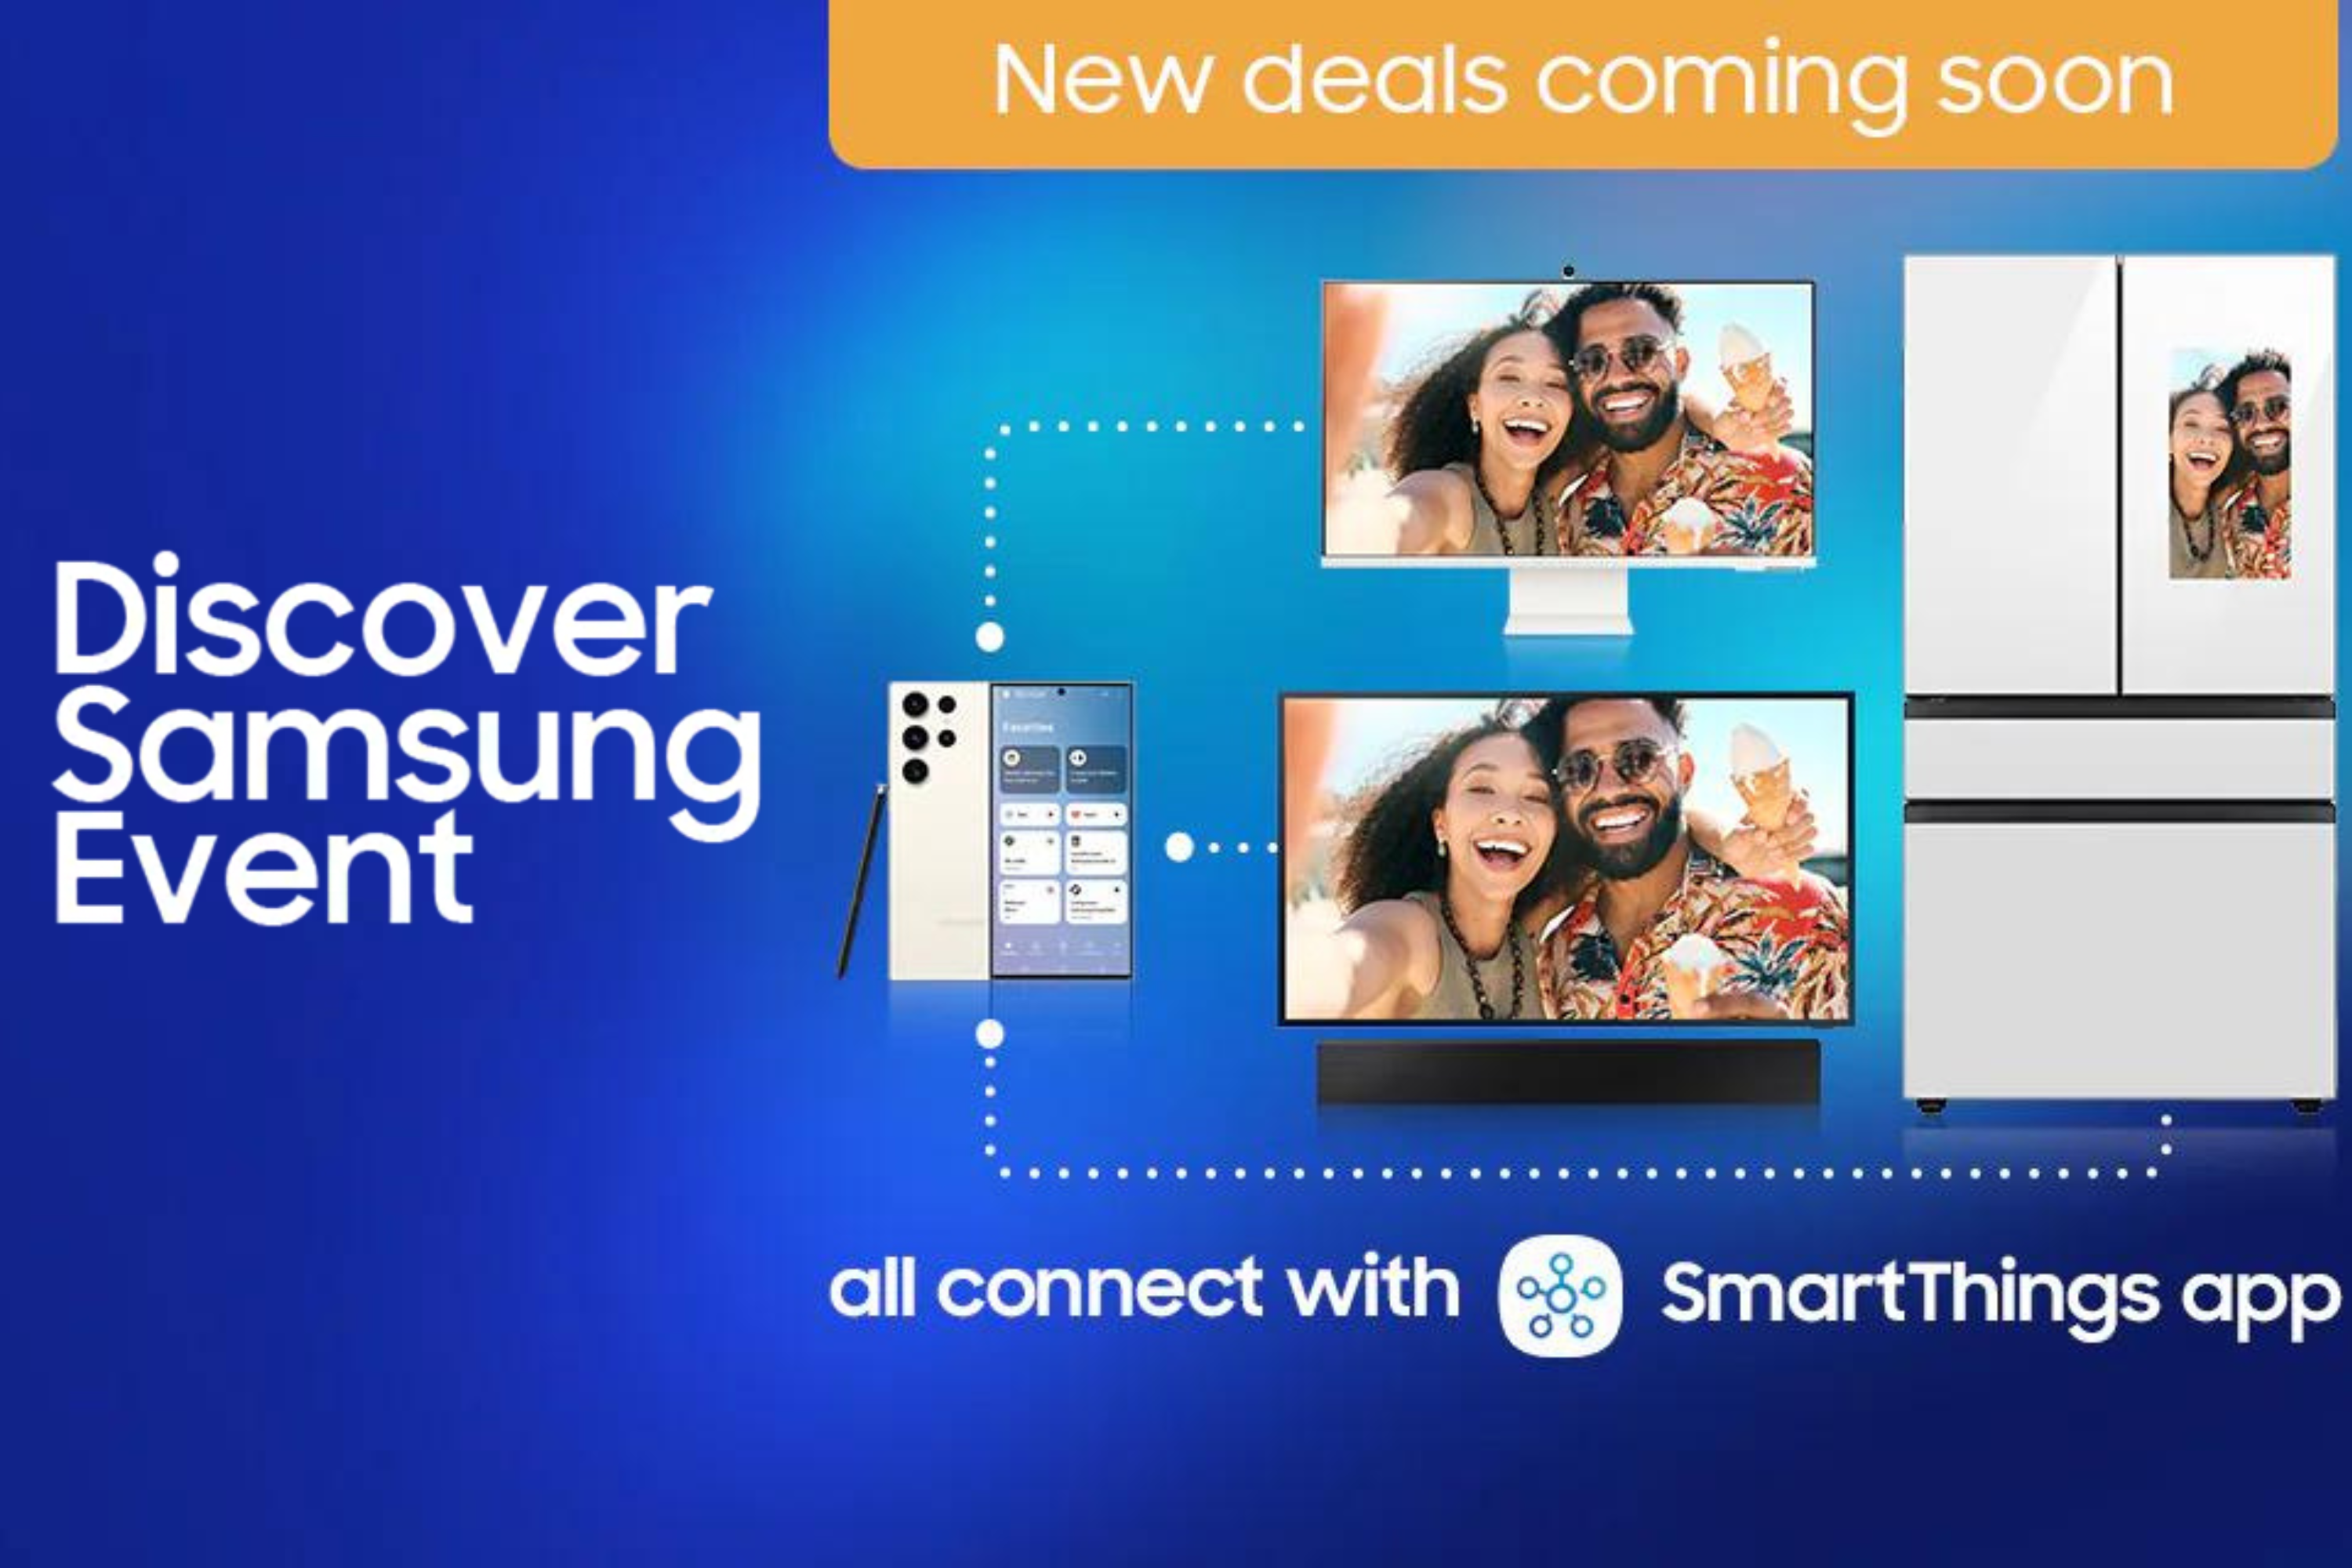 Samsung Discover Event Promo Image showing all connect devices and 